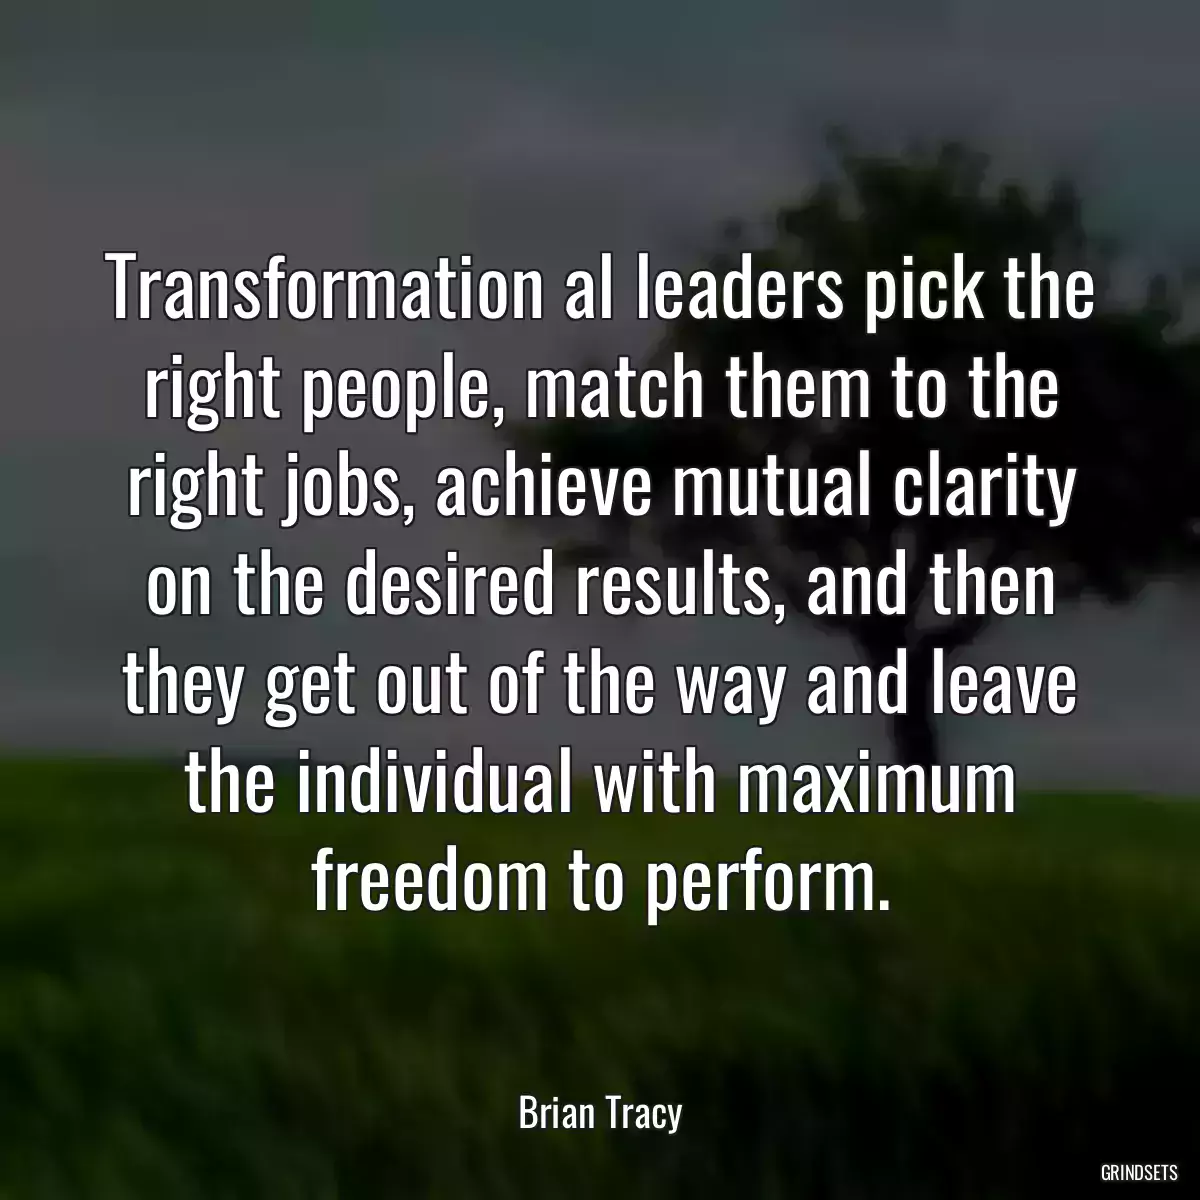 Transformation al leaders pick the right people, match them to the right jobs, achieve mutual clarity on the desired results, and then they get out of the way and leave the individual with maximum freedom to perform.